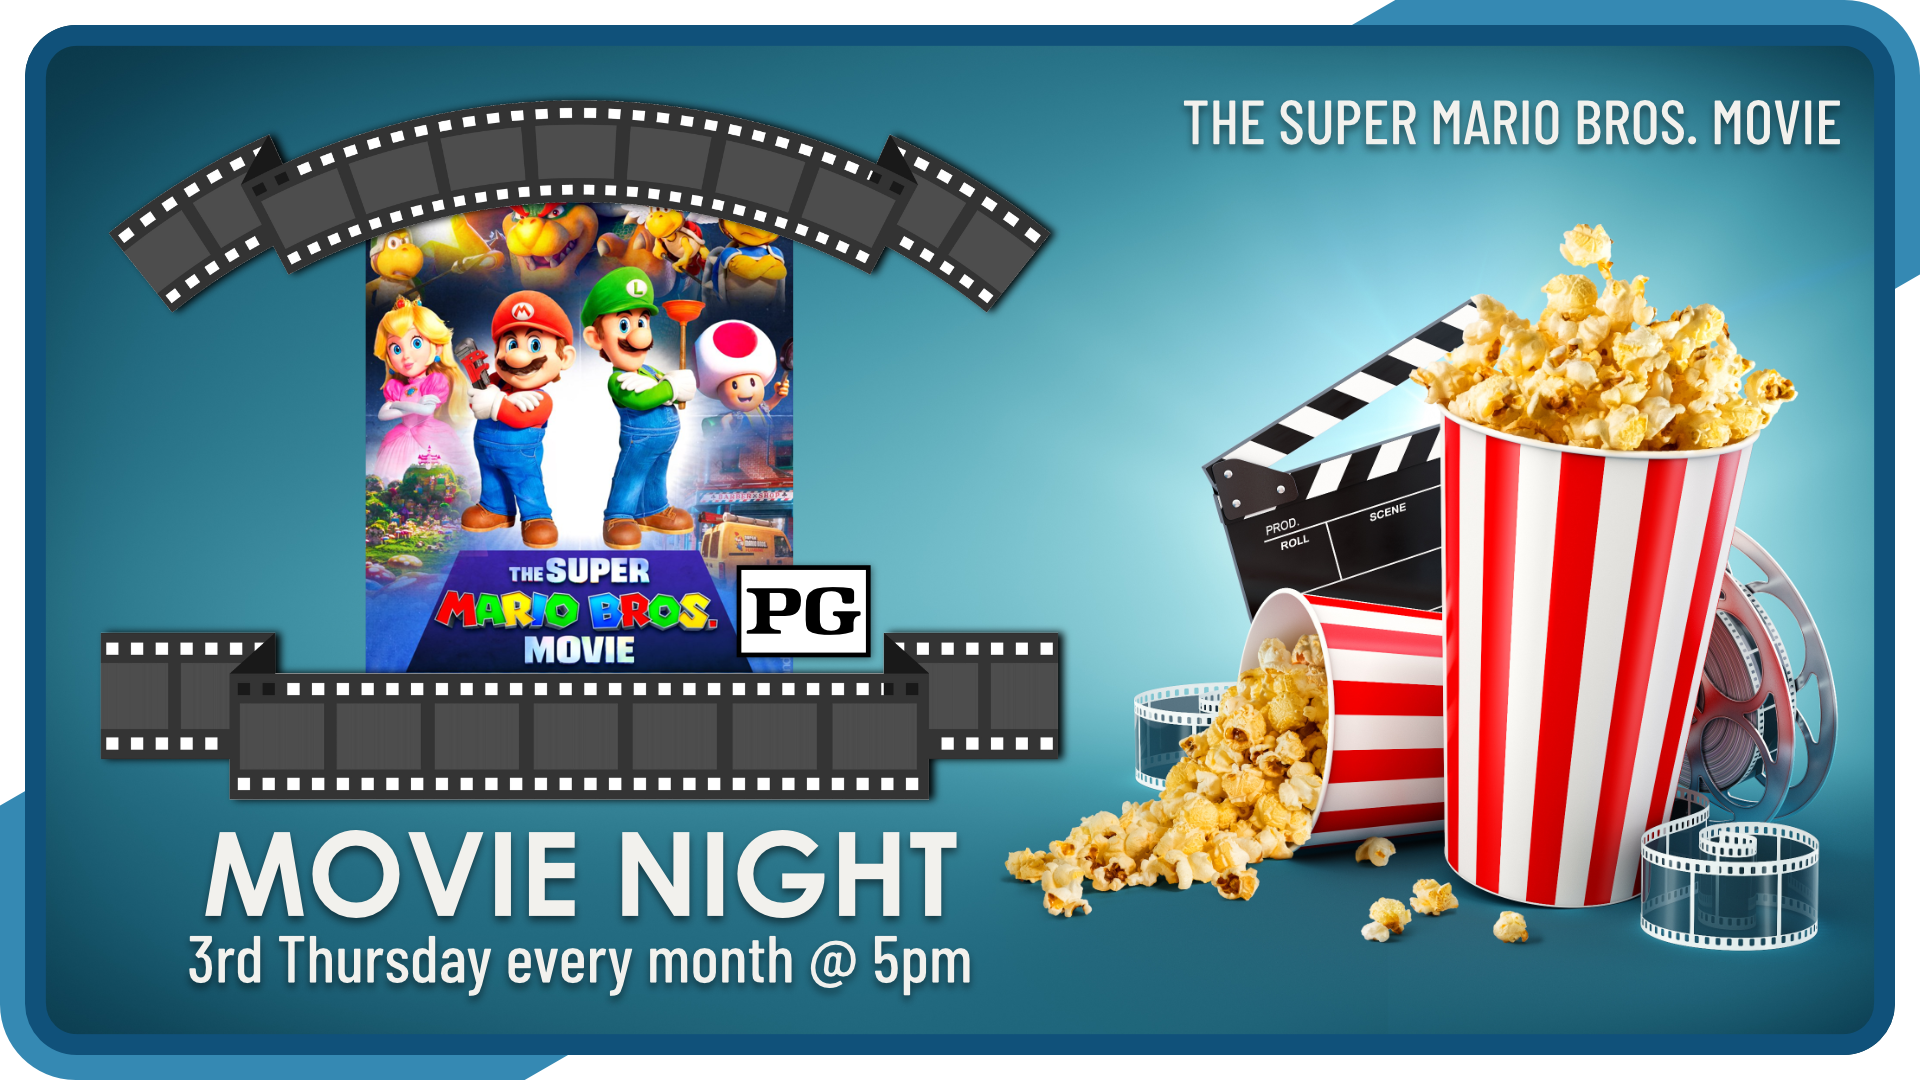 Movie Night, third Thursday monthly at 5pm, intended age groups vary by film rating